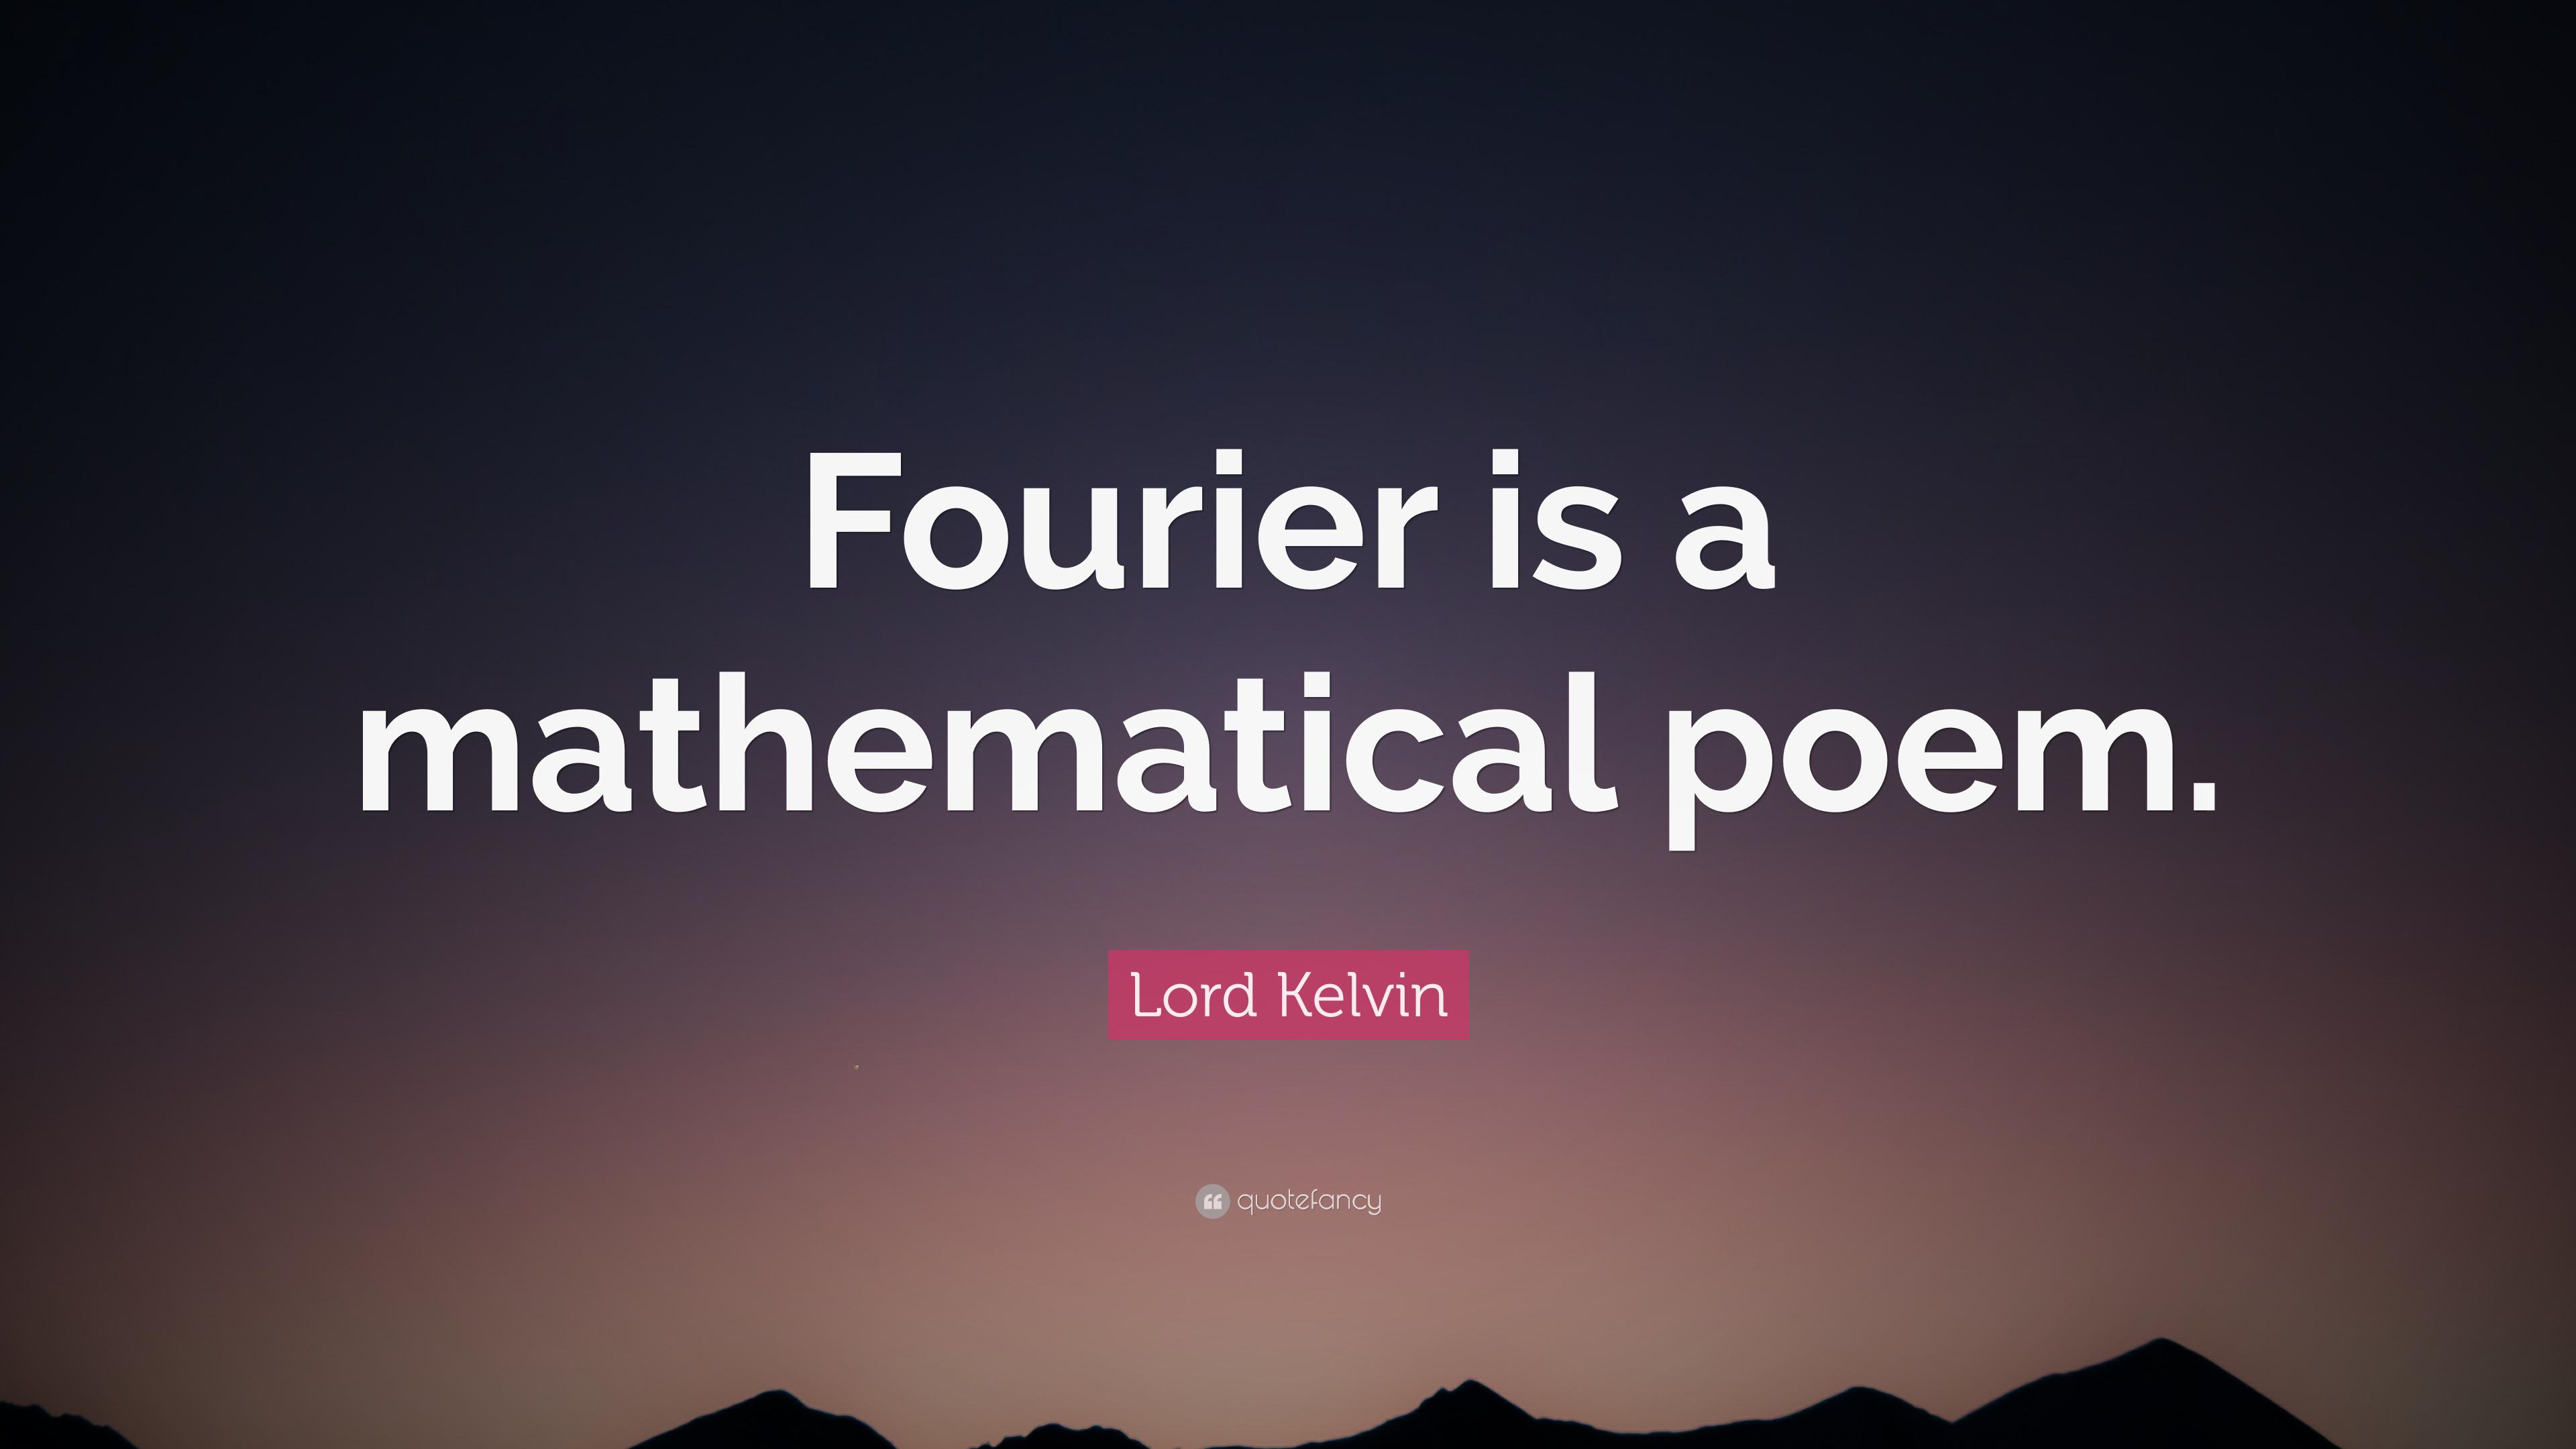 Lord Kelvin Quote: “Fourier is a mathematical poem.” 9 wallpaper